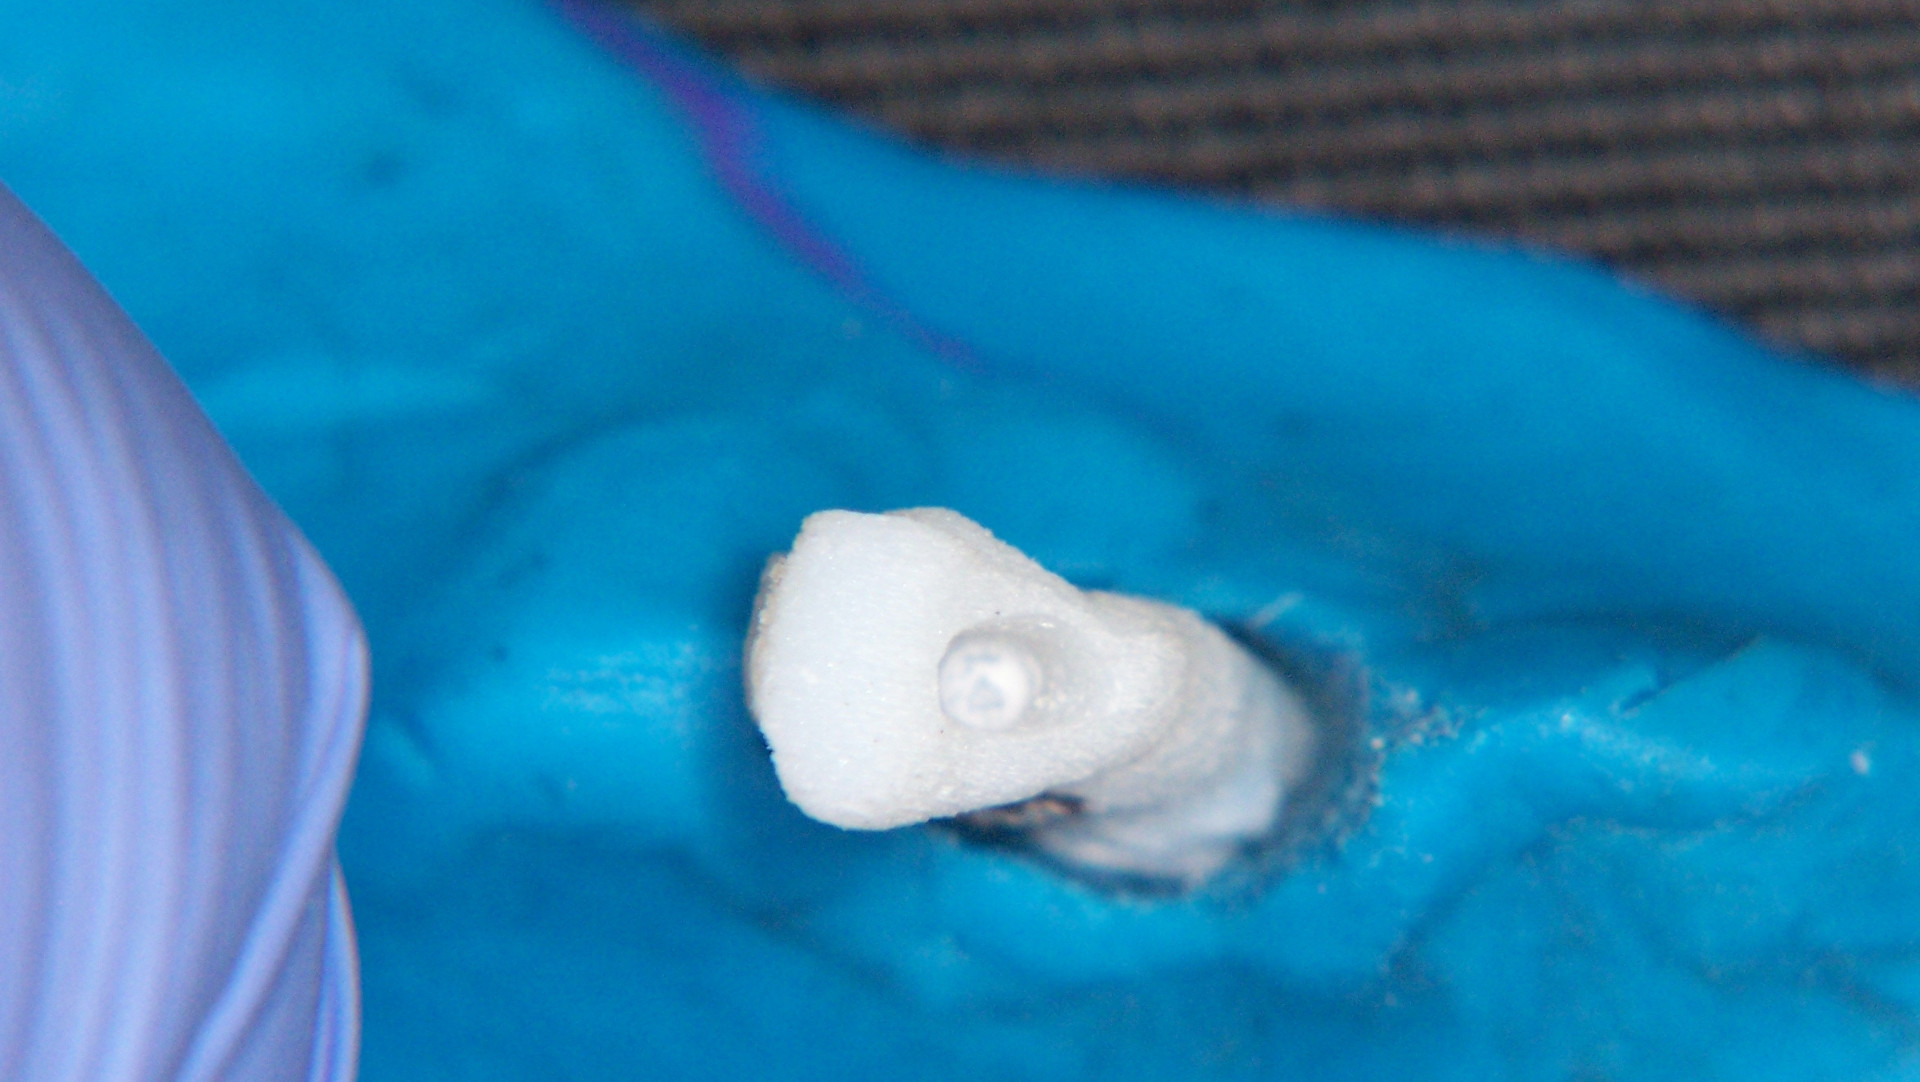 A 3D printed lower incisor used in instruction.